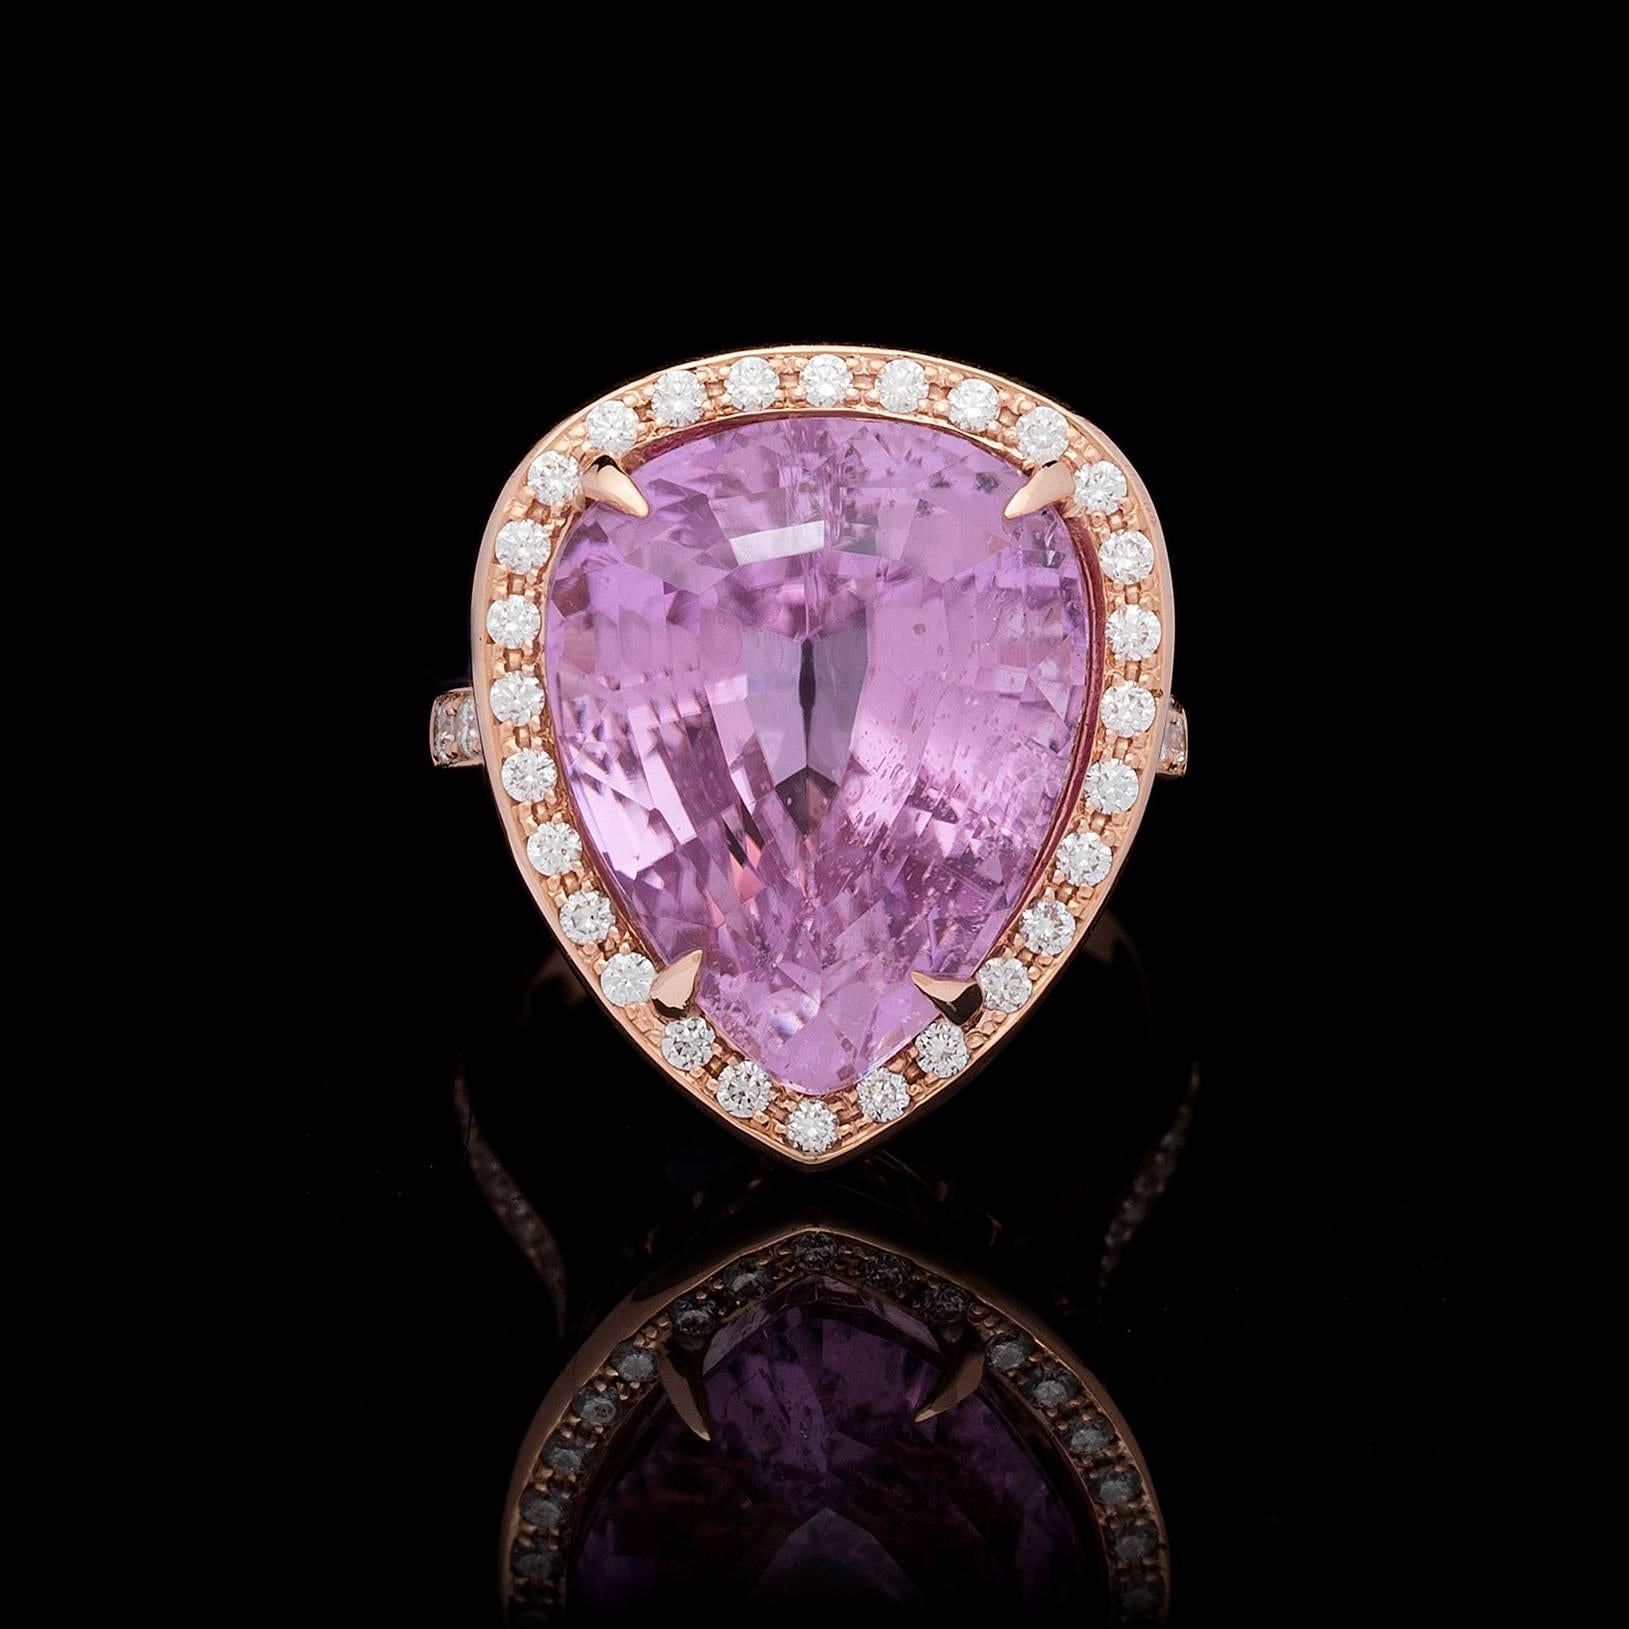 A gorgeous 17.64ct pear shape kunzite in a contemporary 18k rose gold setting with 44 round brilliant cut diamonds, totaling 0.57cttw. The ring is currently a size 6 and can be sized up or down.  This piece weighs 11.8 grams.  An intense purplish